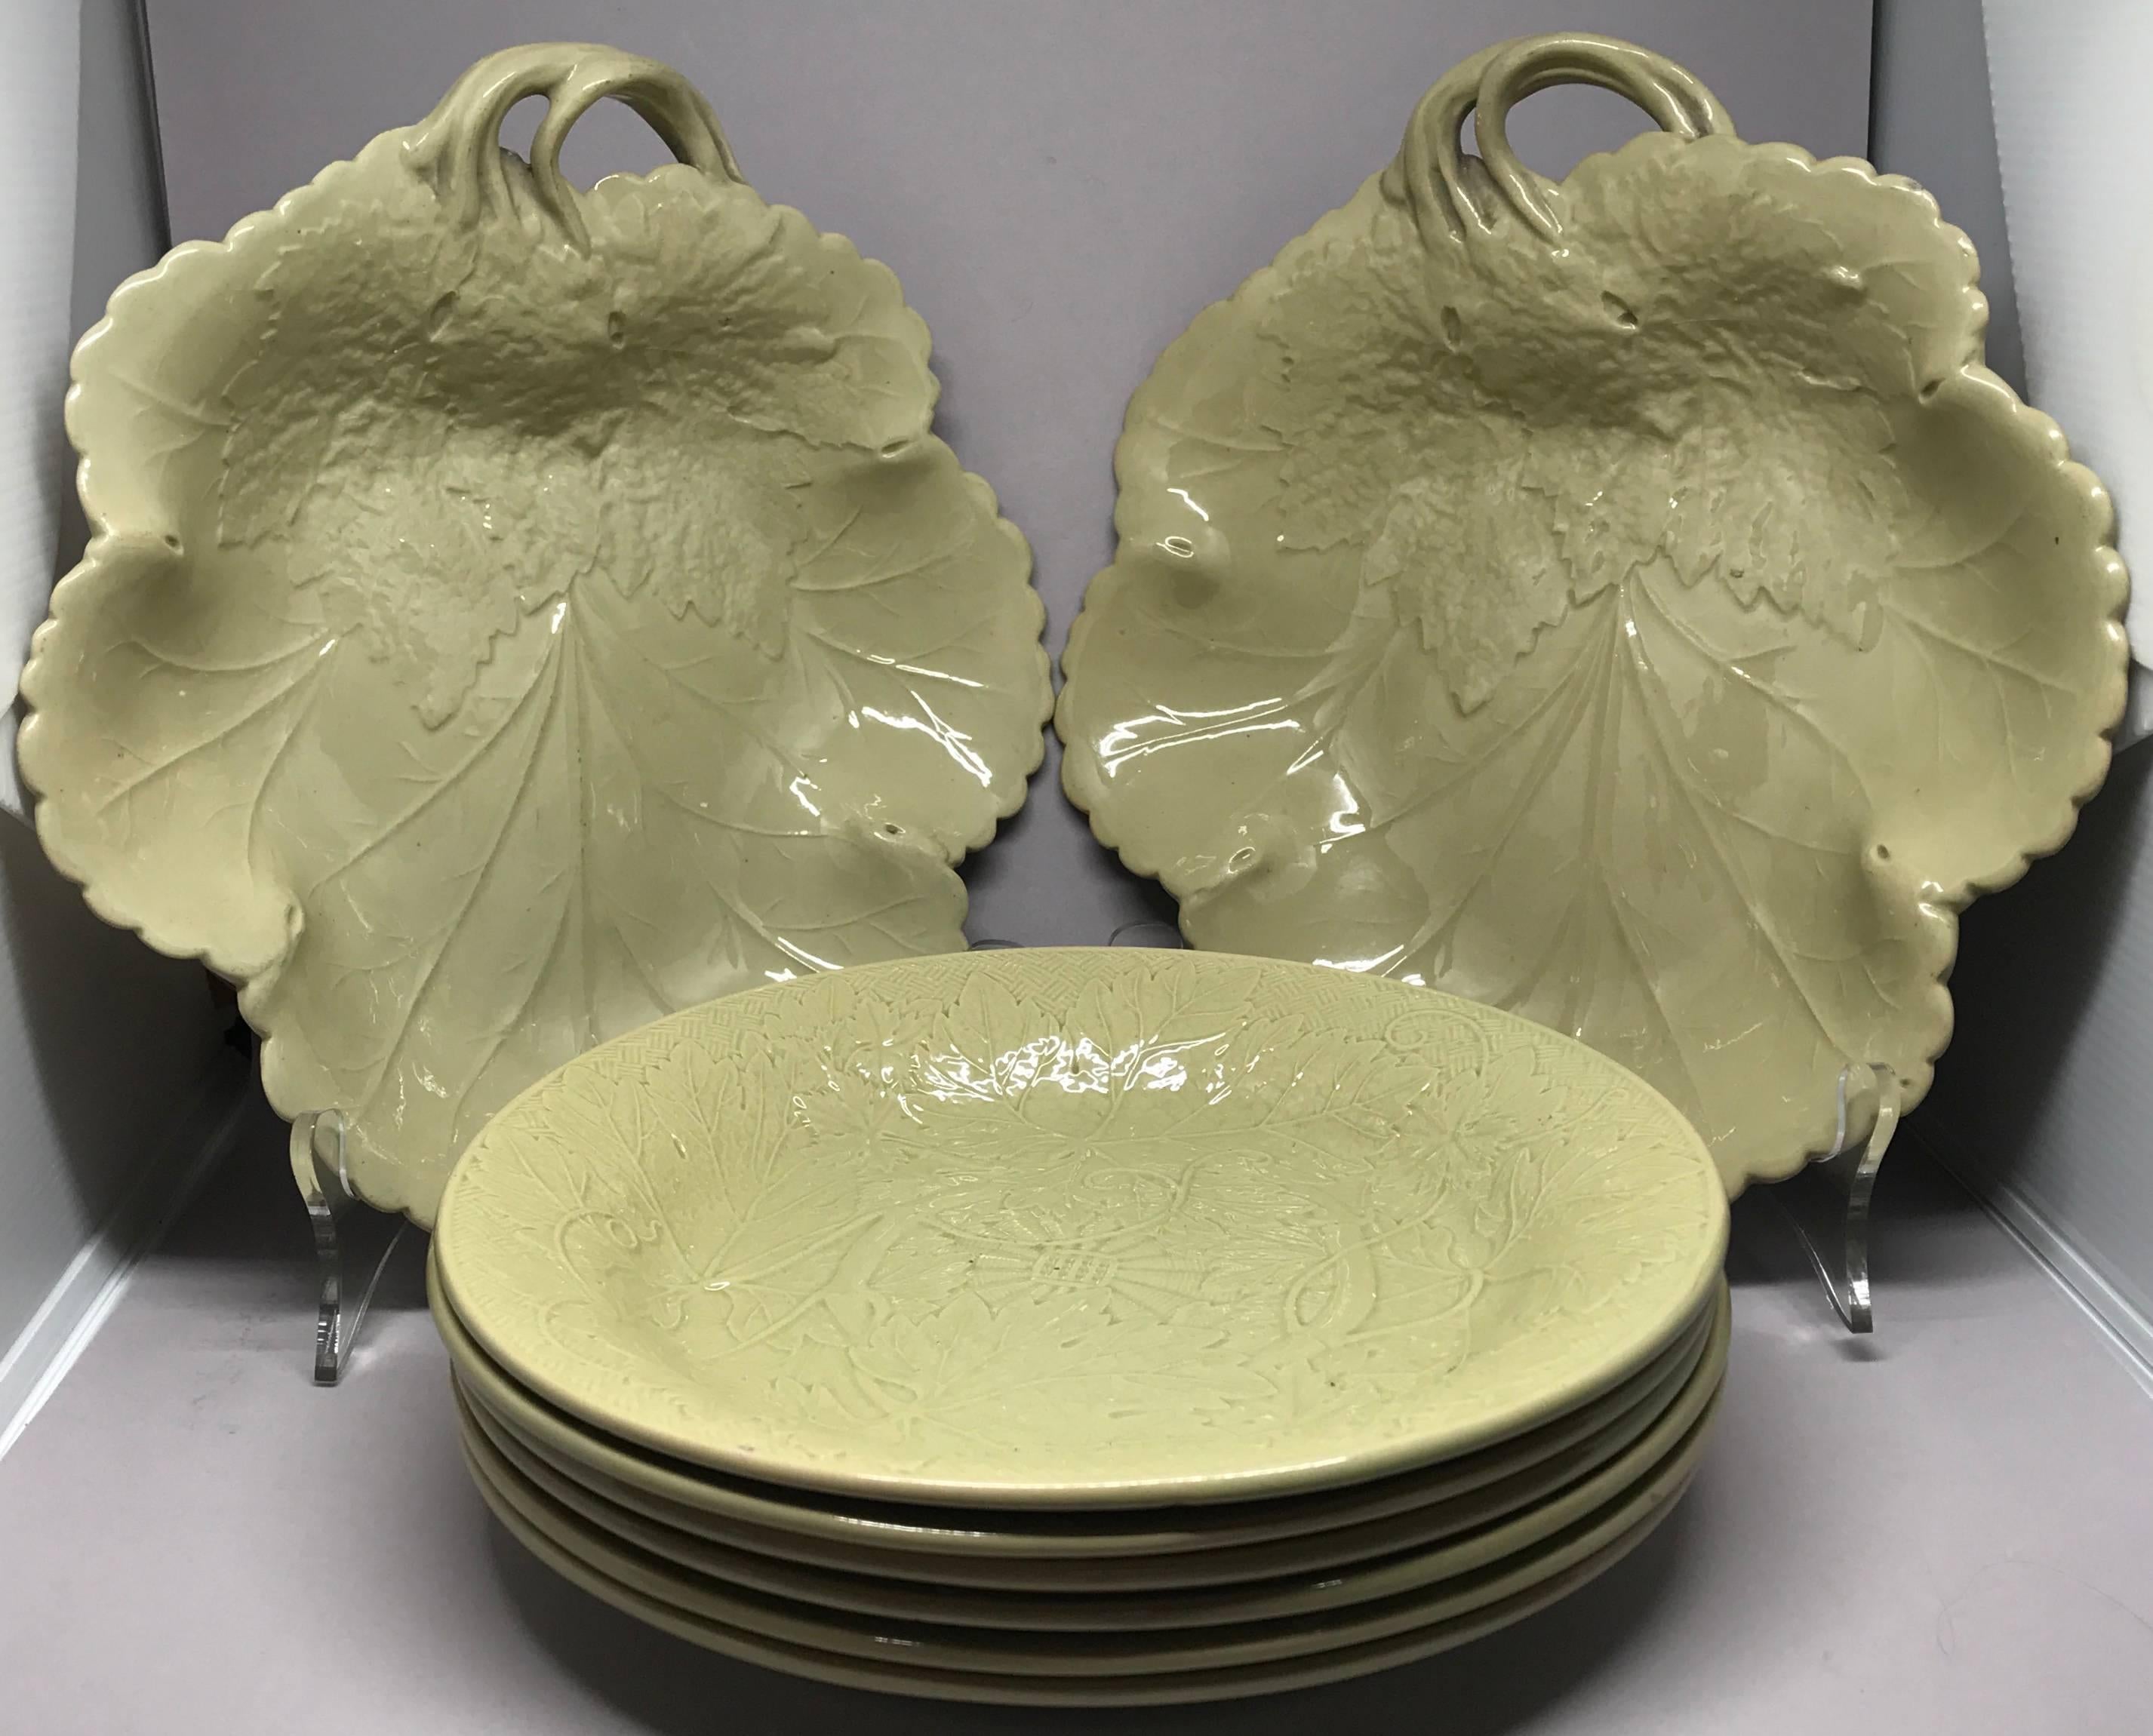 Wedgwood drabware dessert or cheese service. Beautifully modelled set of six grape leaf plates and two serving dishes in perfect condition. Impressed markings for Wedgwood, England, mid-19th century
Dimensions: Plates 8.25